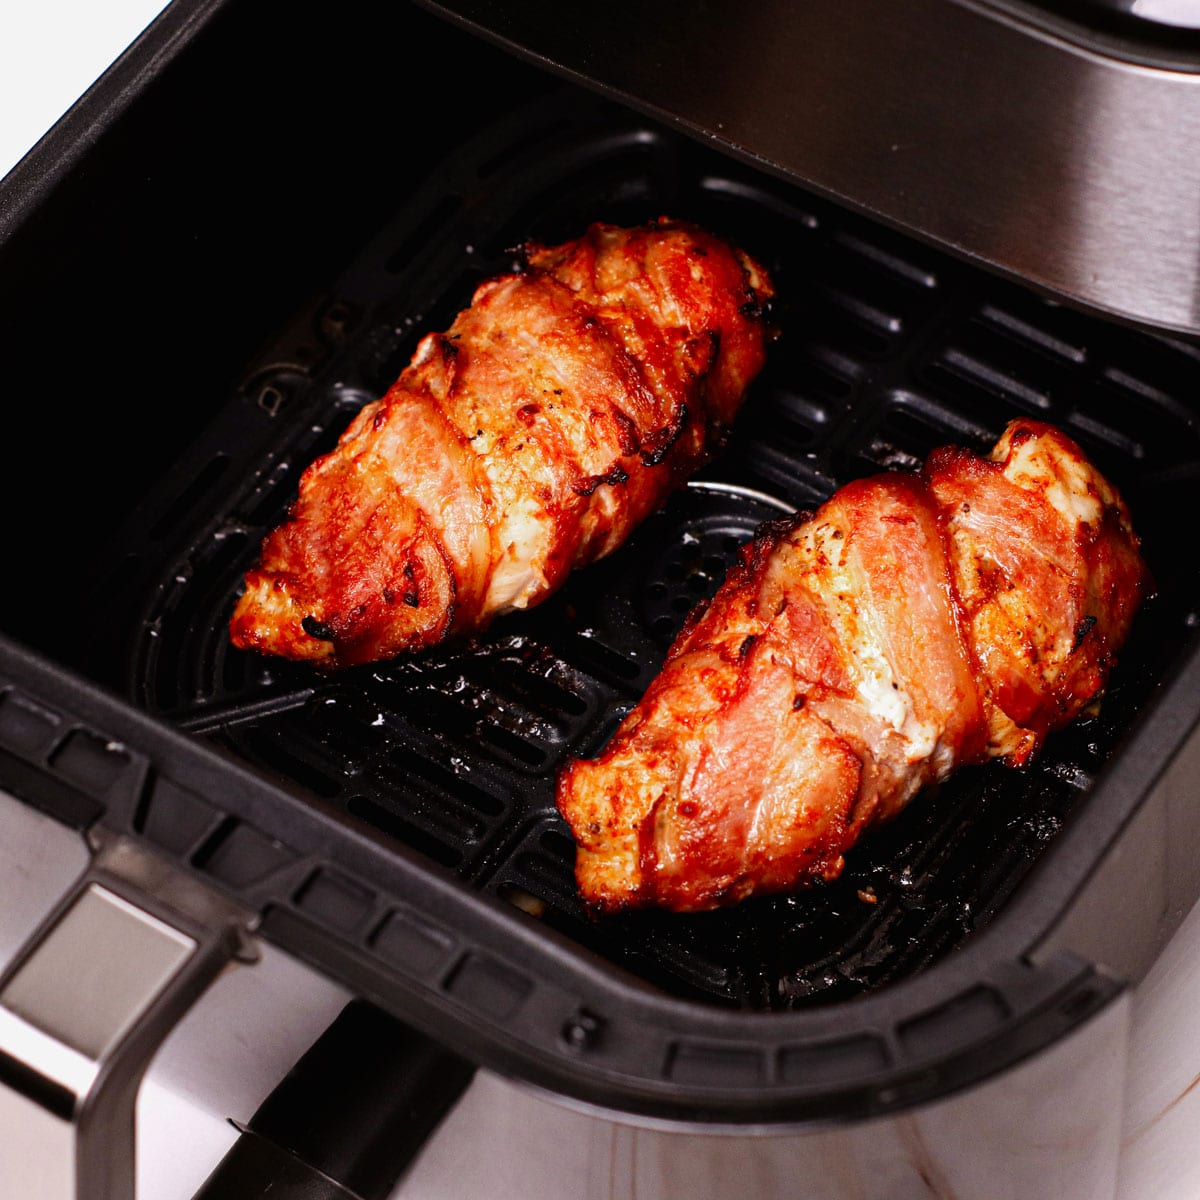 Cooking bacon wrapped chicken breast in air fryer